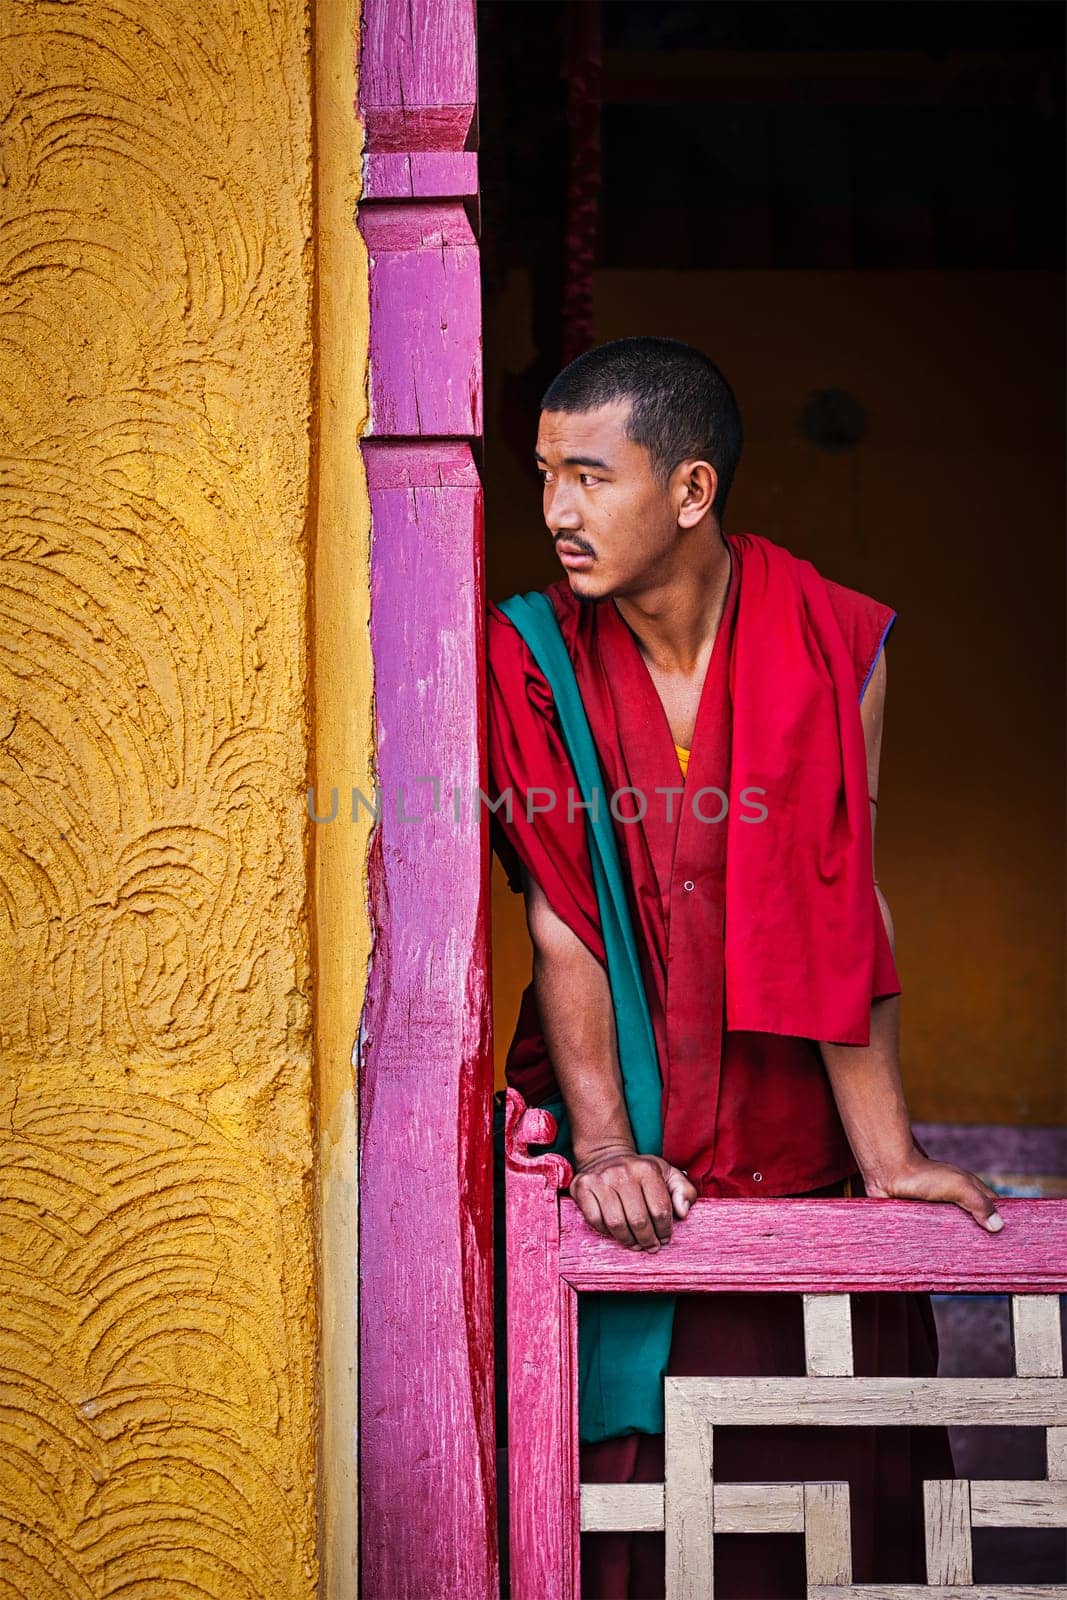 THIKSEY, INDIA - SEPTEMBER 13, 2012: Young Buddhist monk standing in doorway of of Thiksey gompa, Ladakh, India